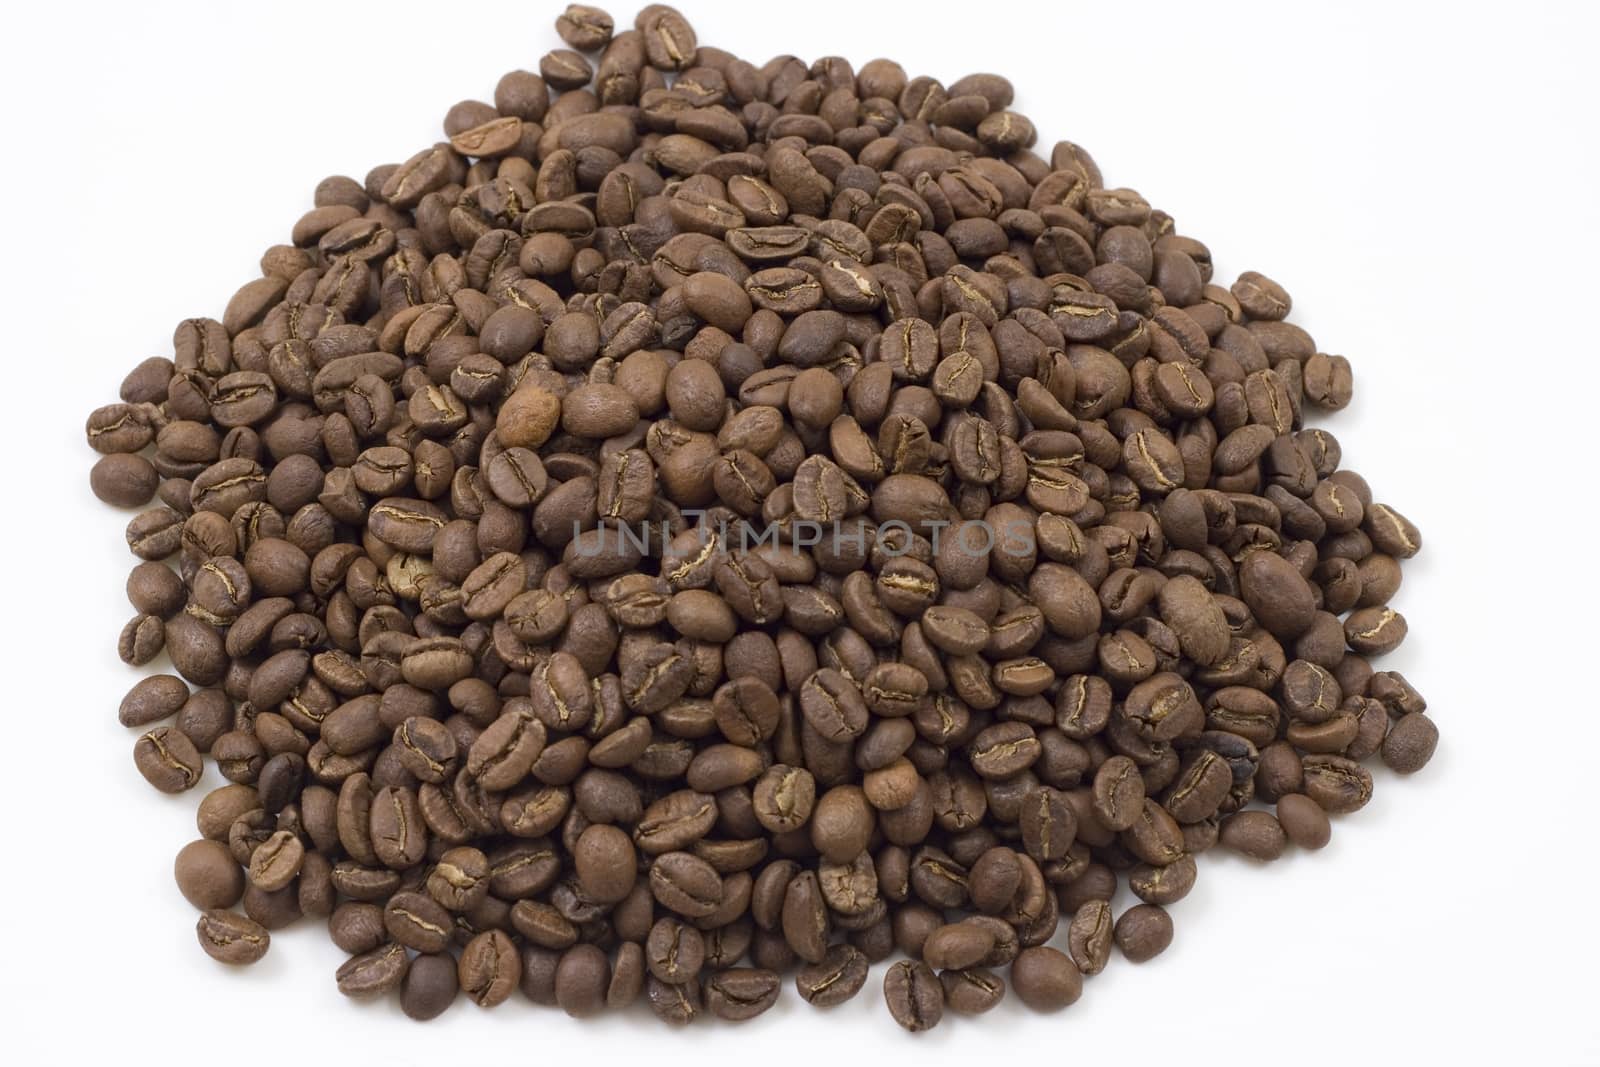 brown roasted coffee beans on white background